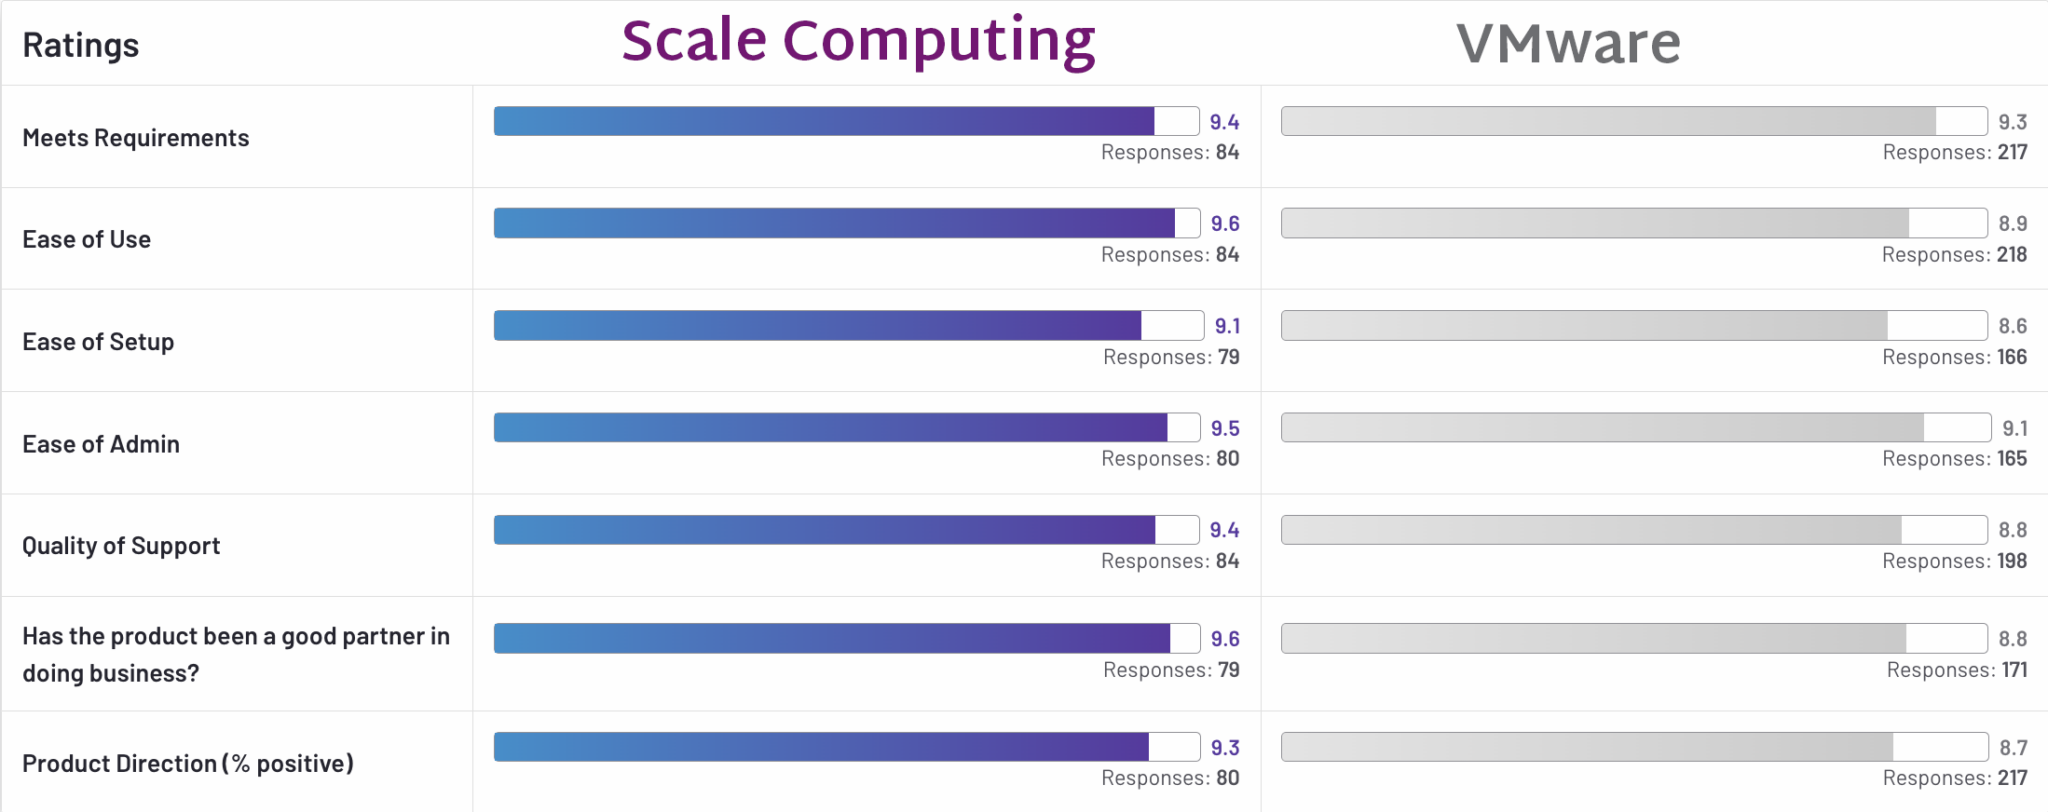 scale-computing_vs_vmware_overall_ratings